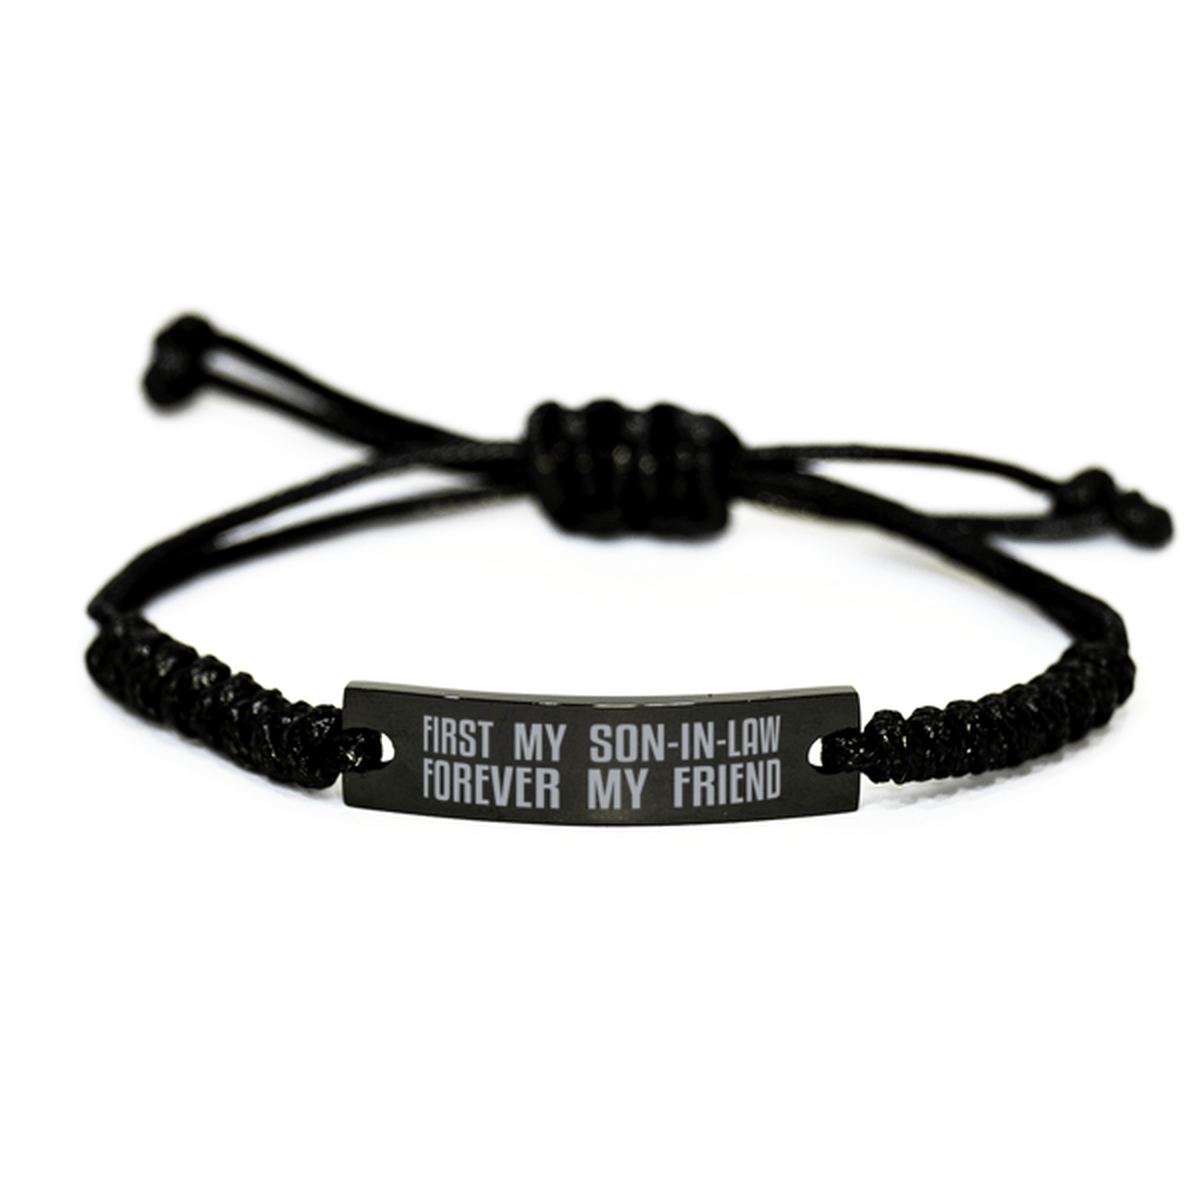 Unique Son-in-law Engraved Rope Bracelet, First My Son-in-law Forever My Friend, Best Gift for Son-in-law Birthday, Christmas